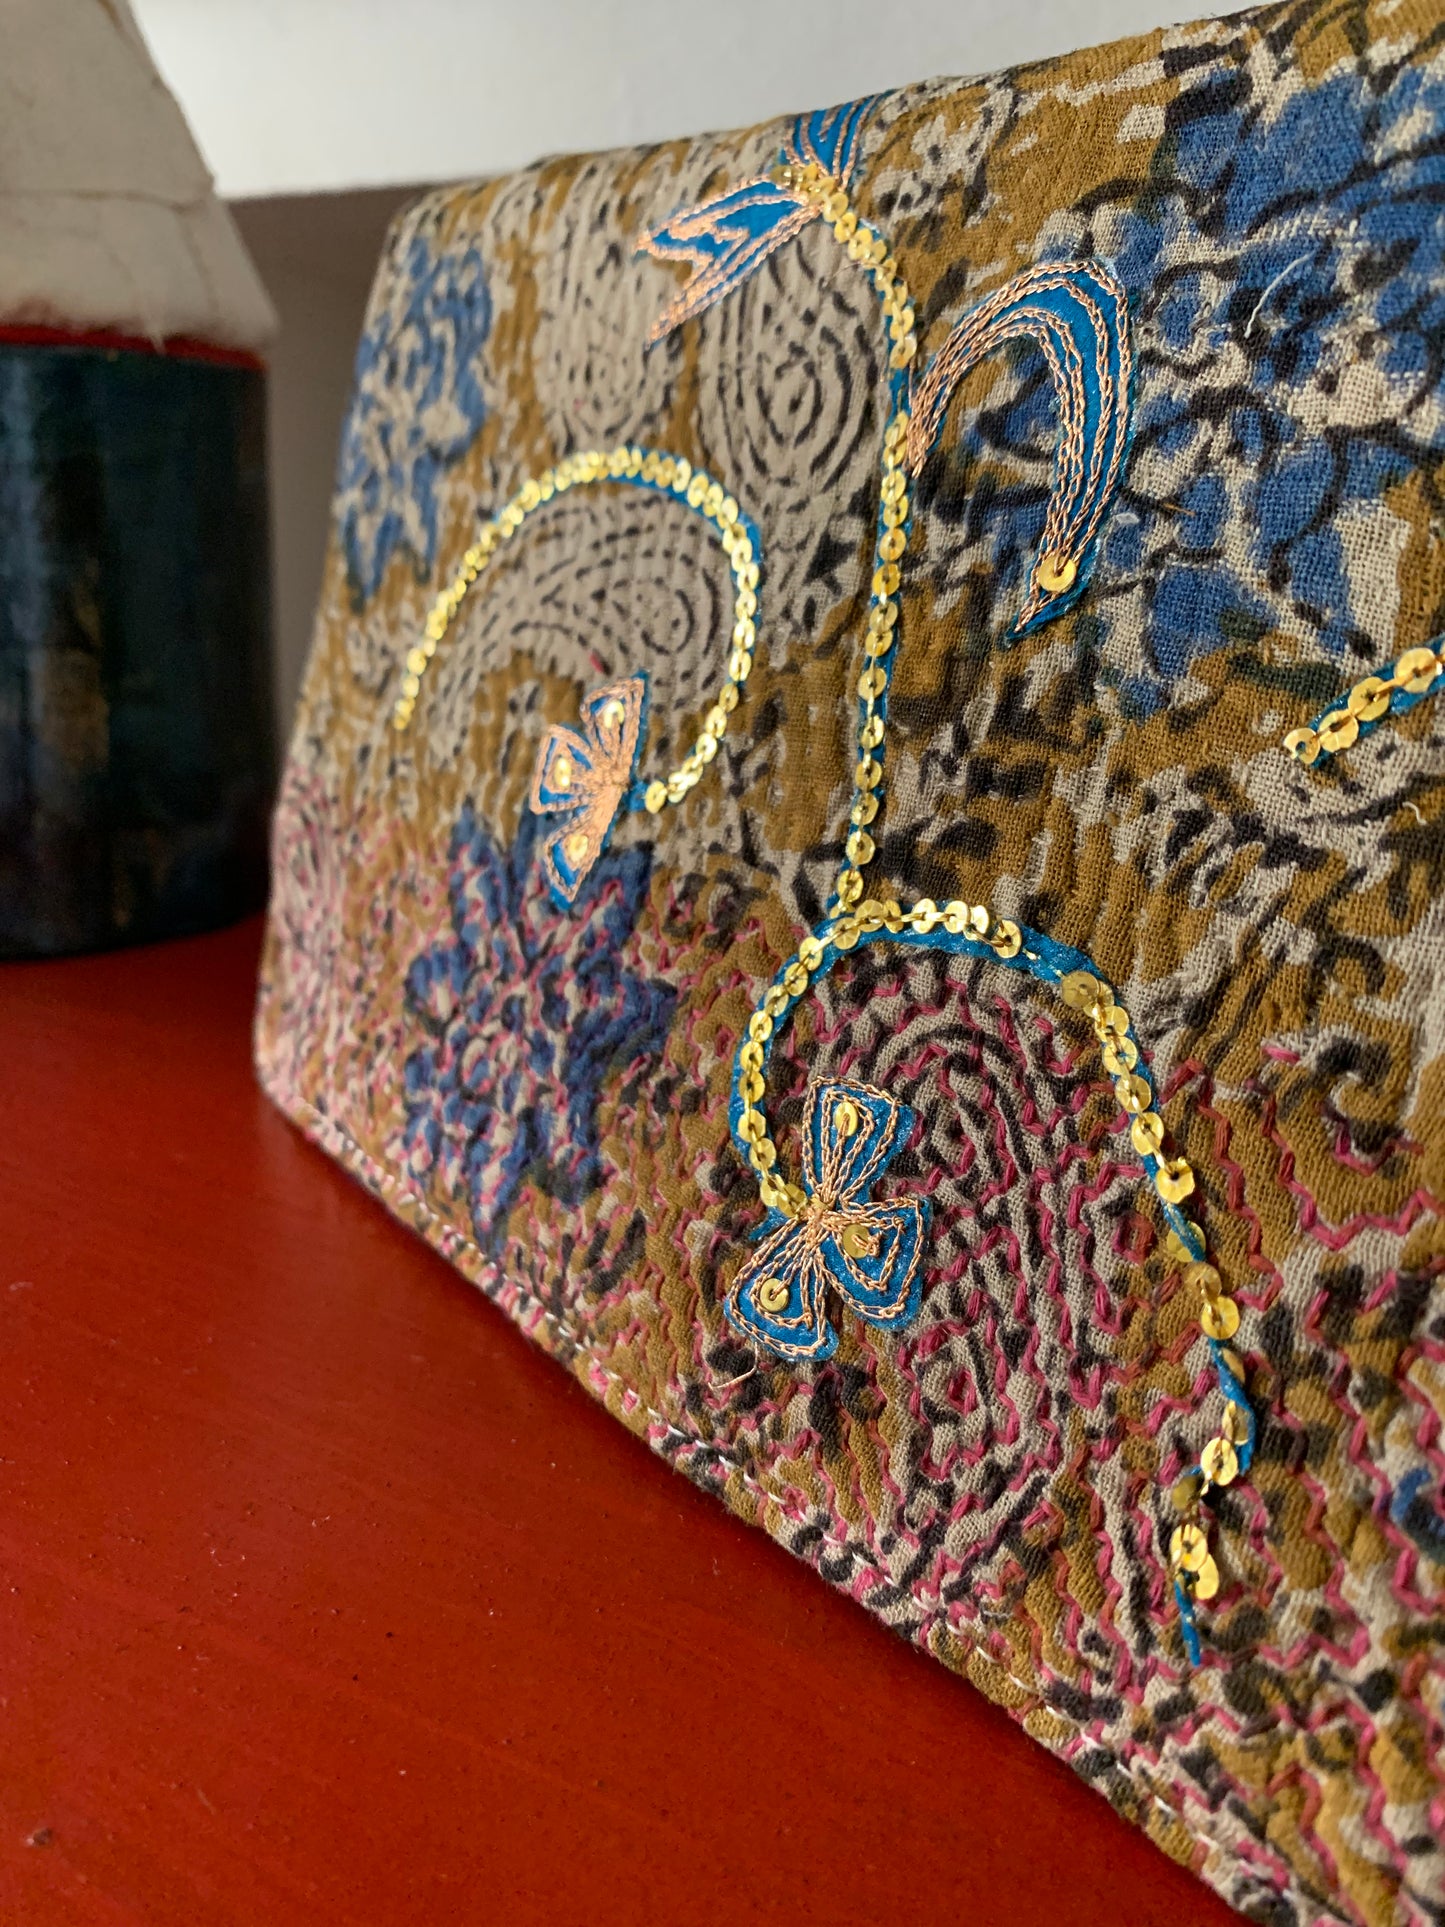 Sustainable: Handcrafted Vintage Clutch with Embroidered Detailing